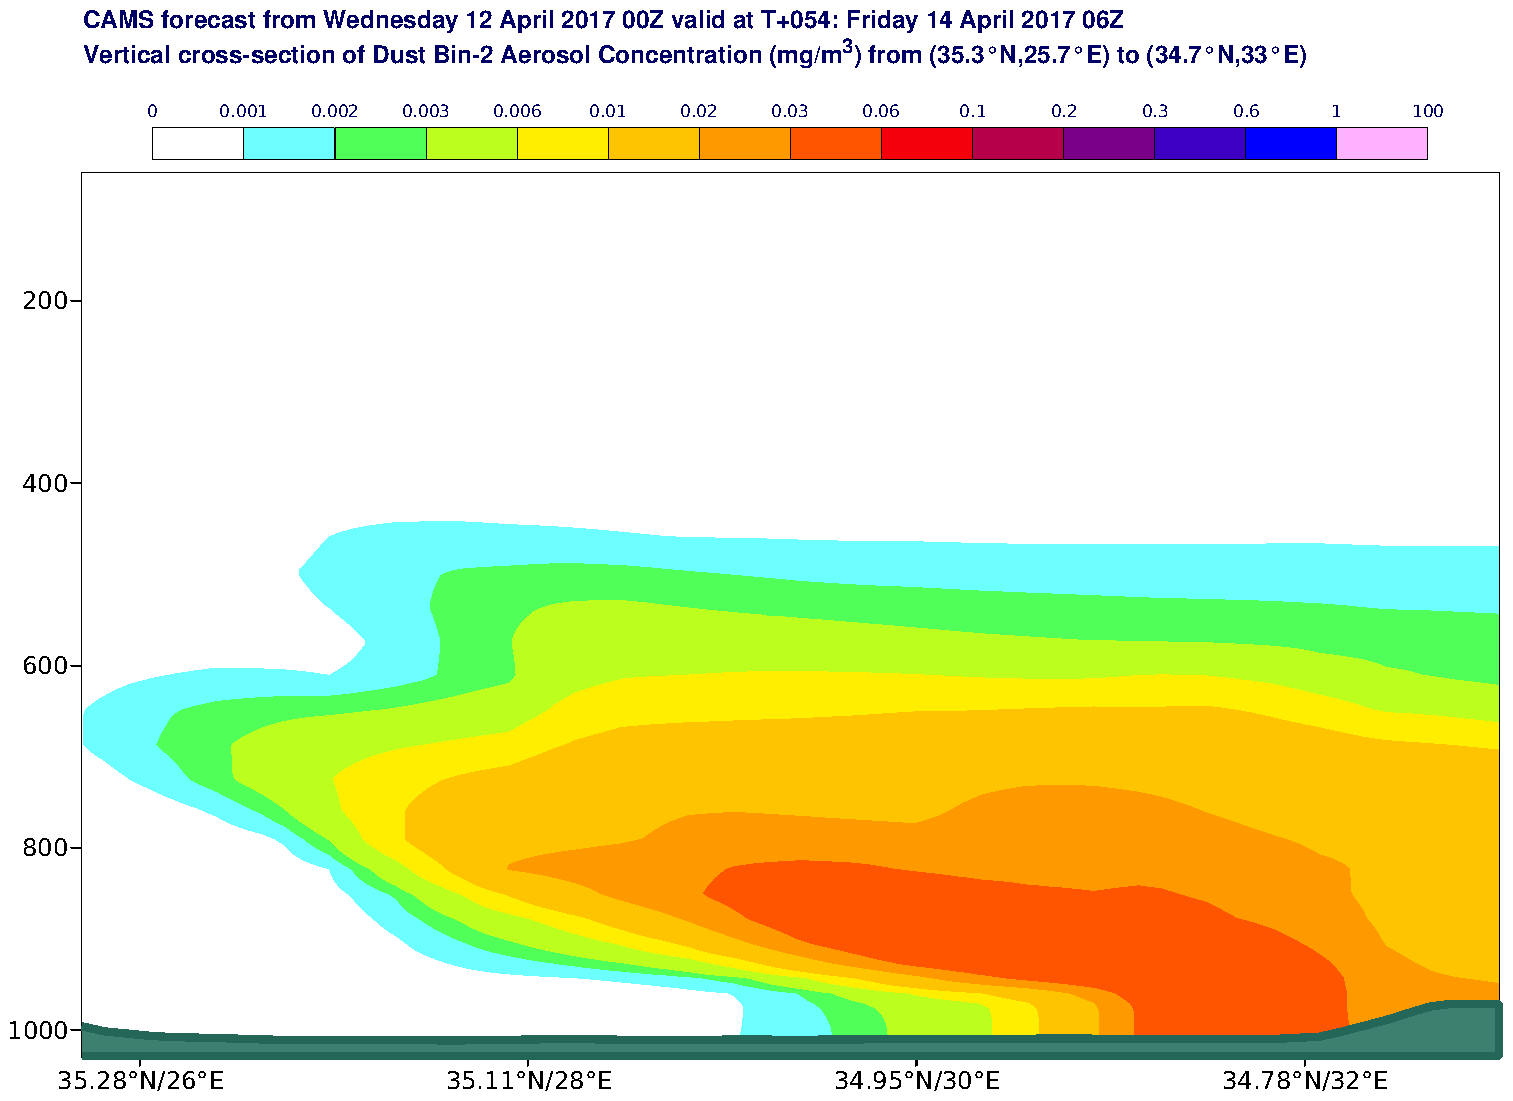 Vertical cross-section of Dust Bin-2 Aerosol Concentration (mg/m3) valid at T54 - 2017-04-14 06:00